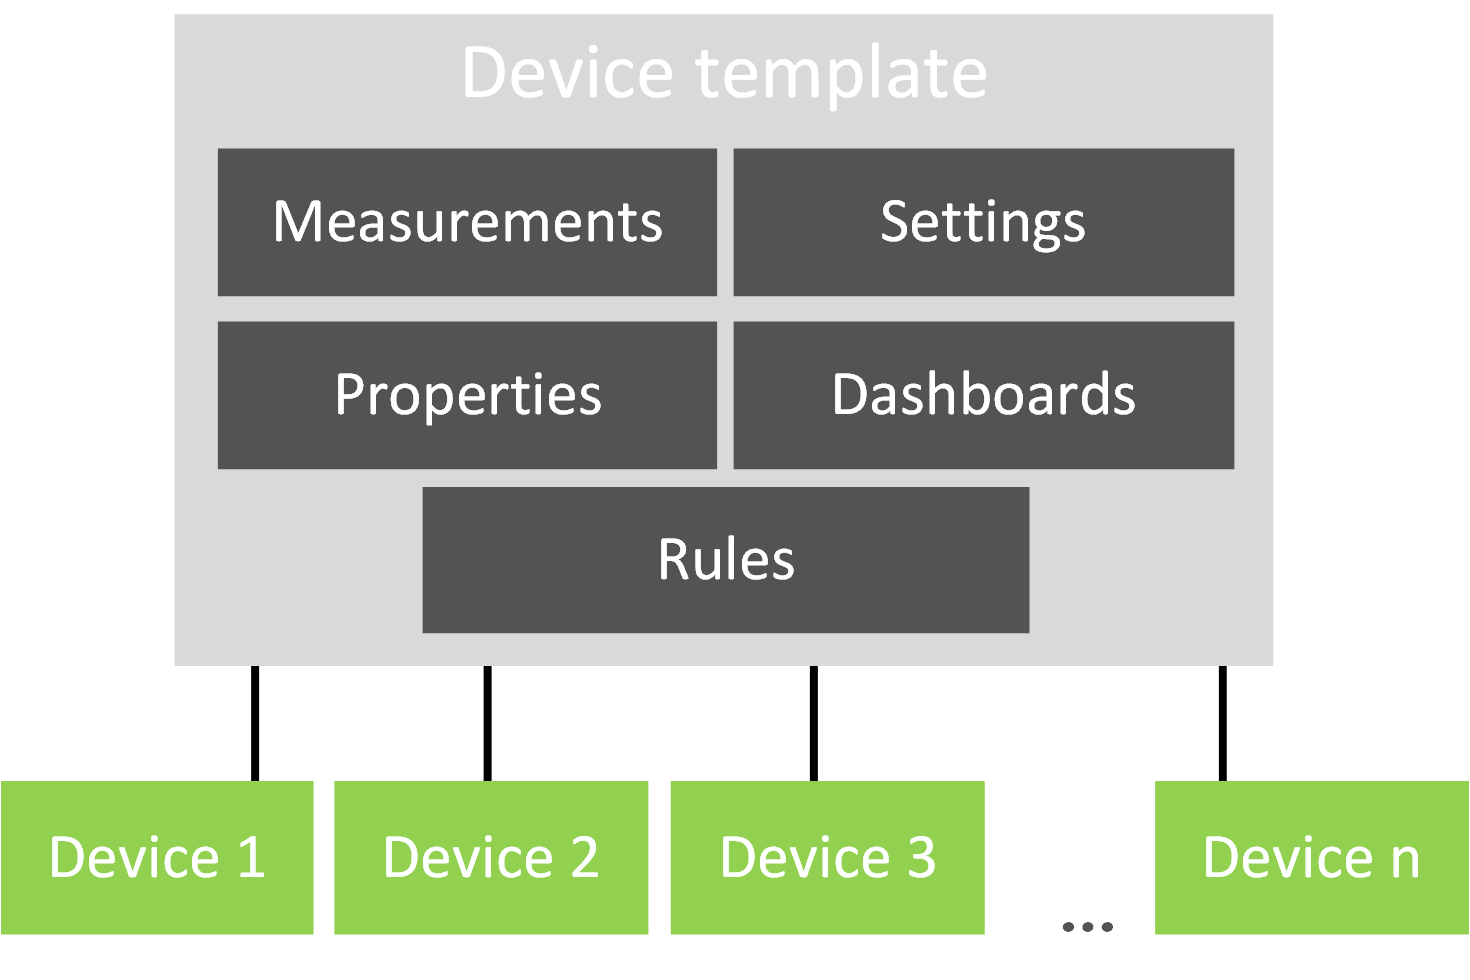 Diagram of Device template architecture.